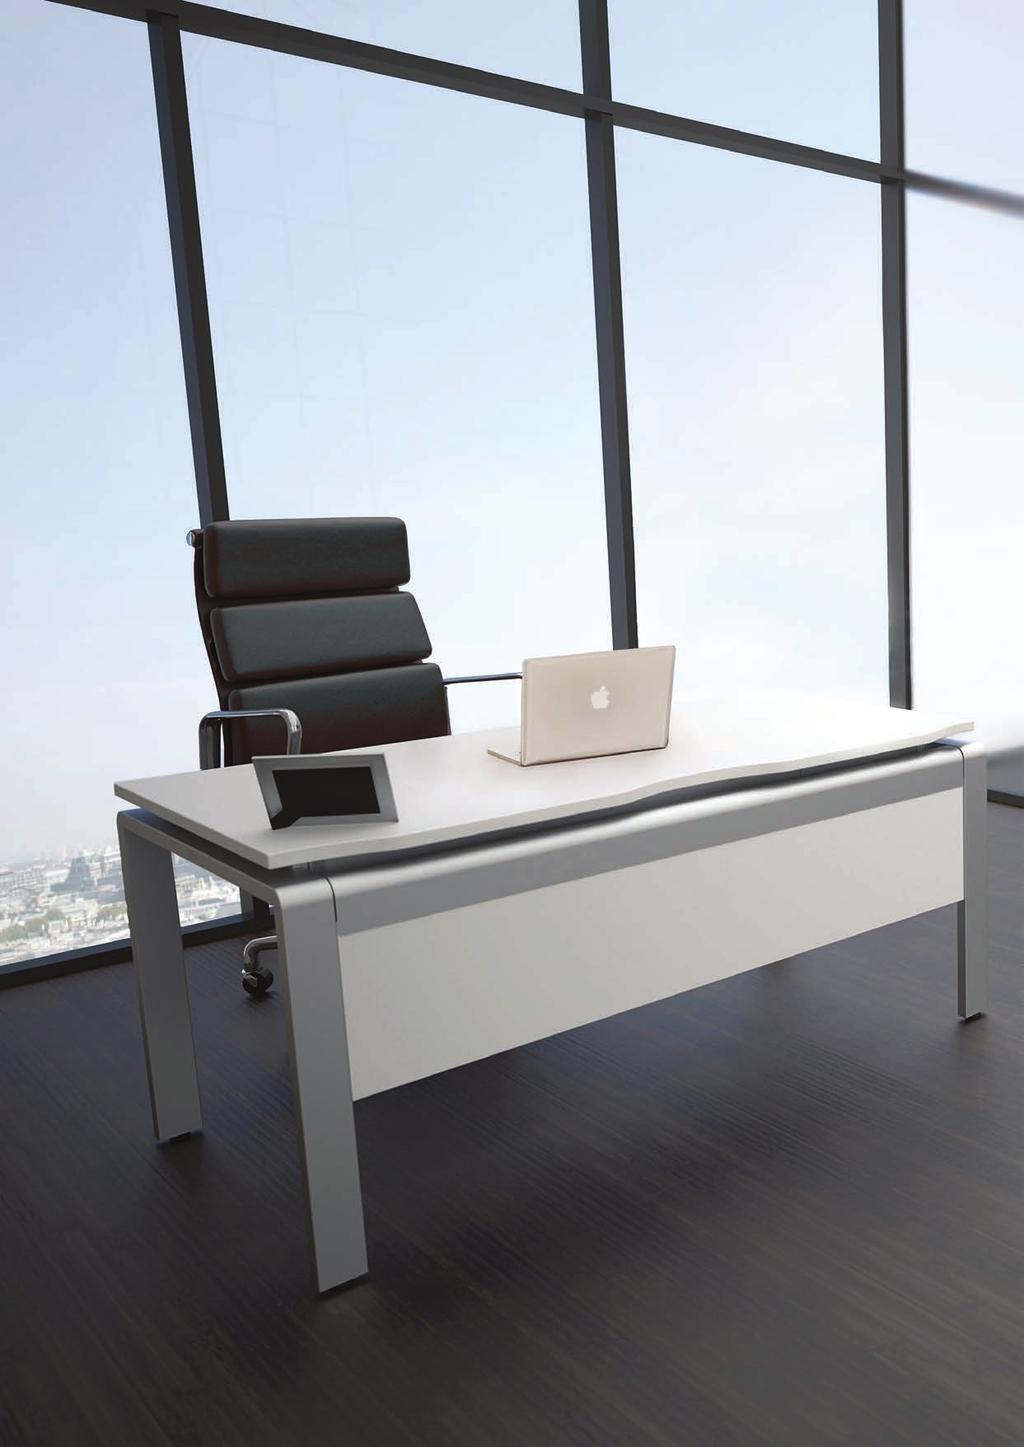 The mark of distinction Left: Single Rectangular, White: Featured is the Rectangular Single desk in White with a Silver frame.